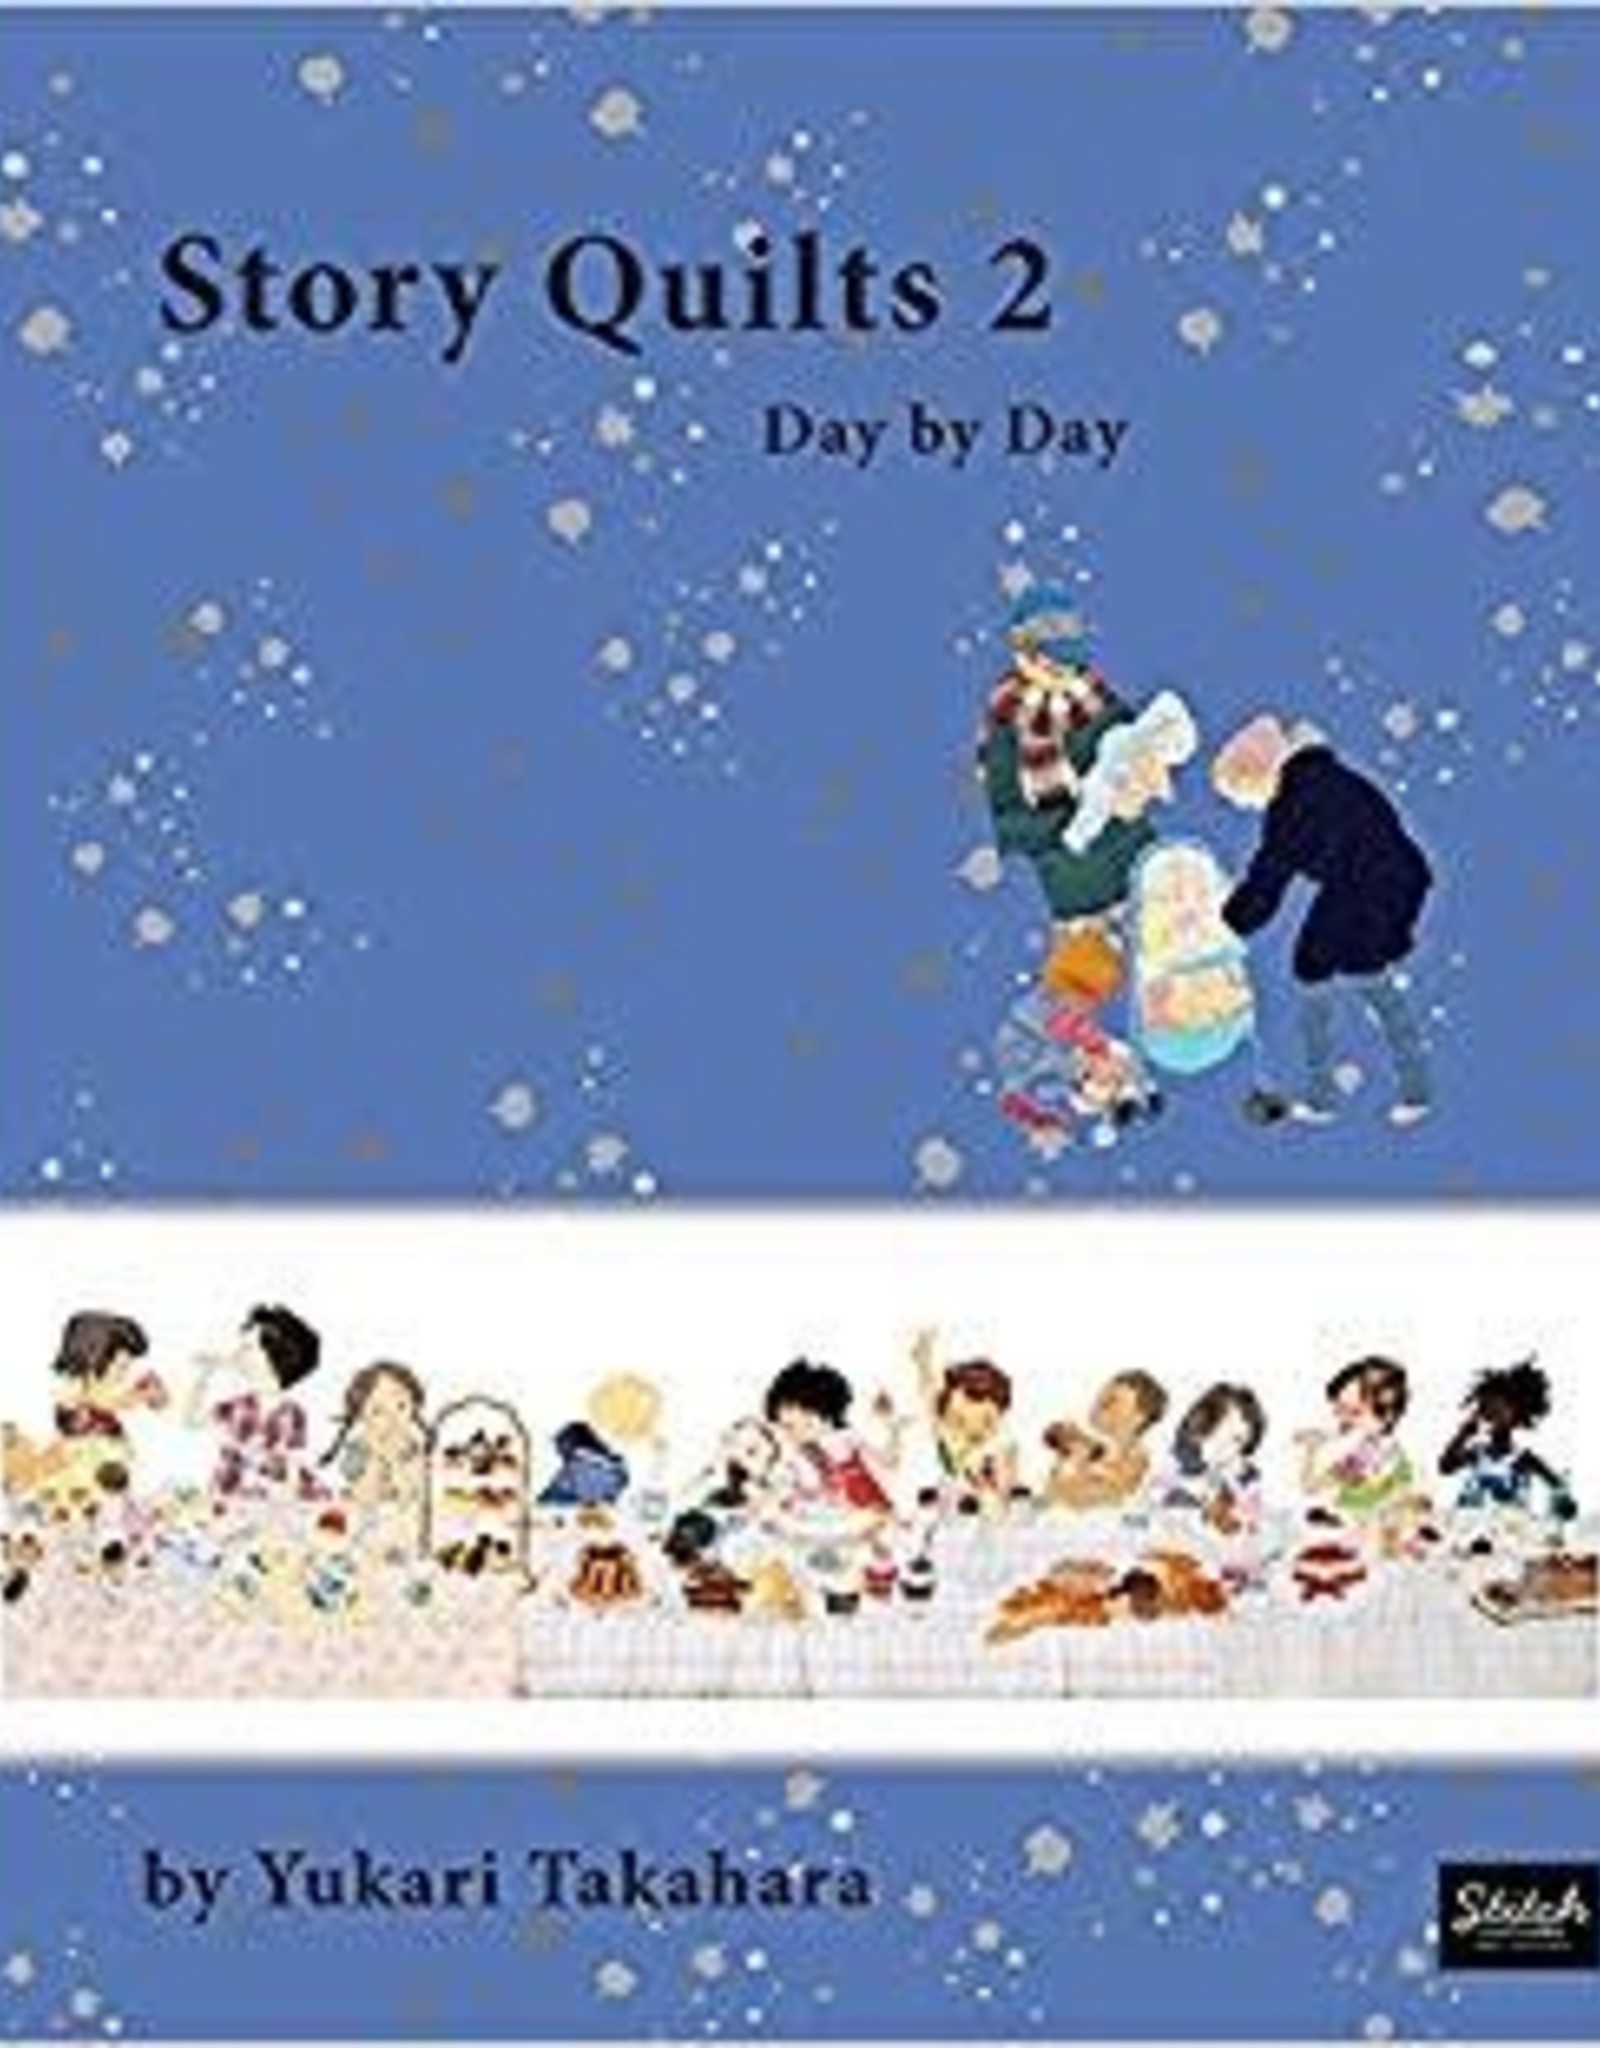 Story Quilts 2: Day by Day by Yukari Takahara